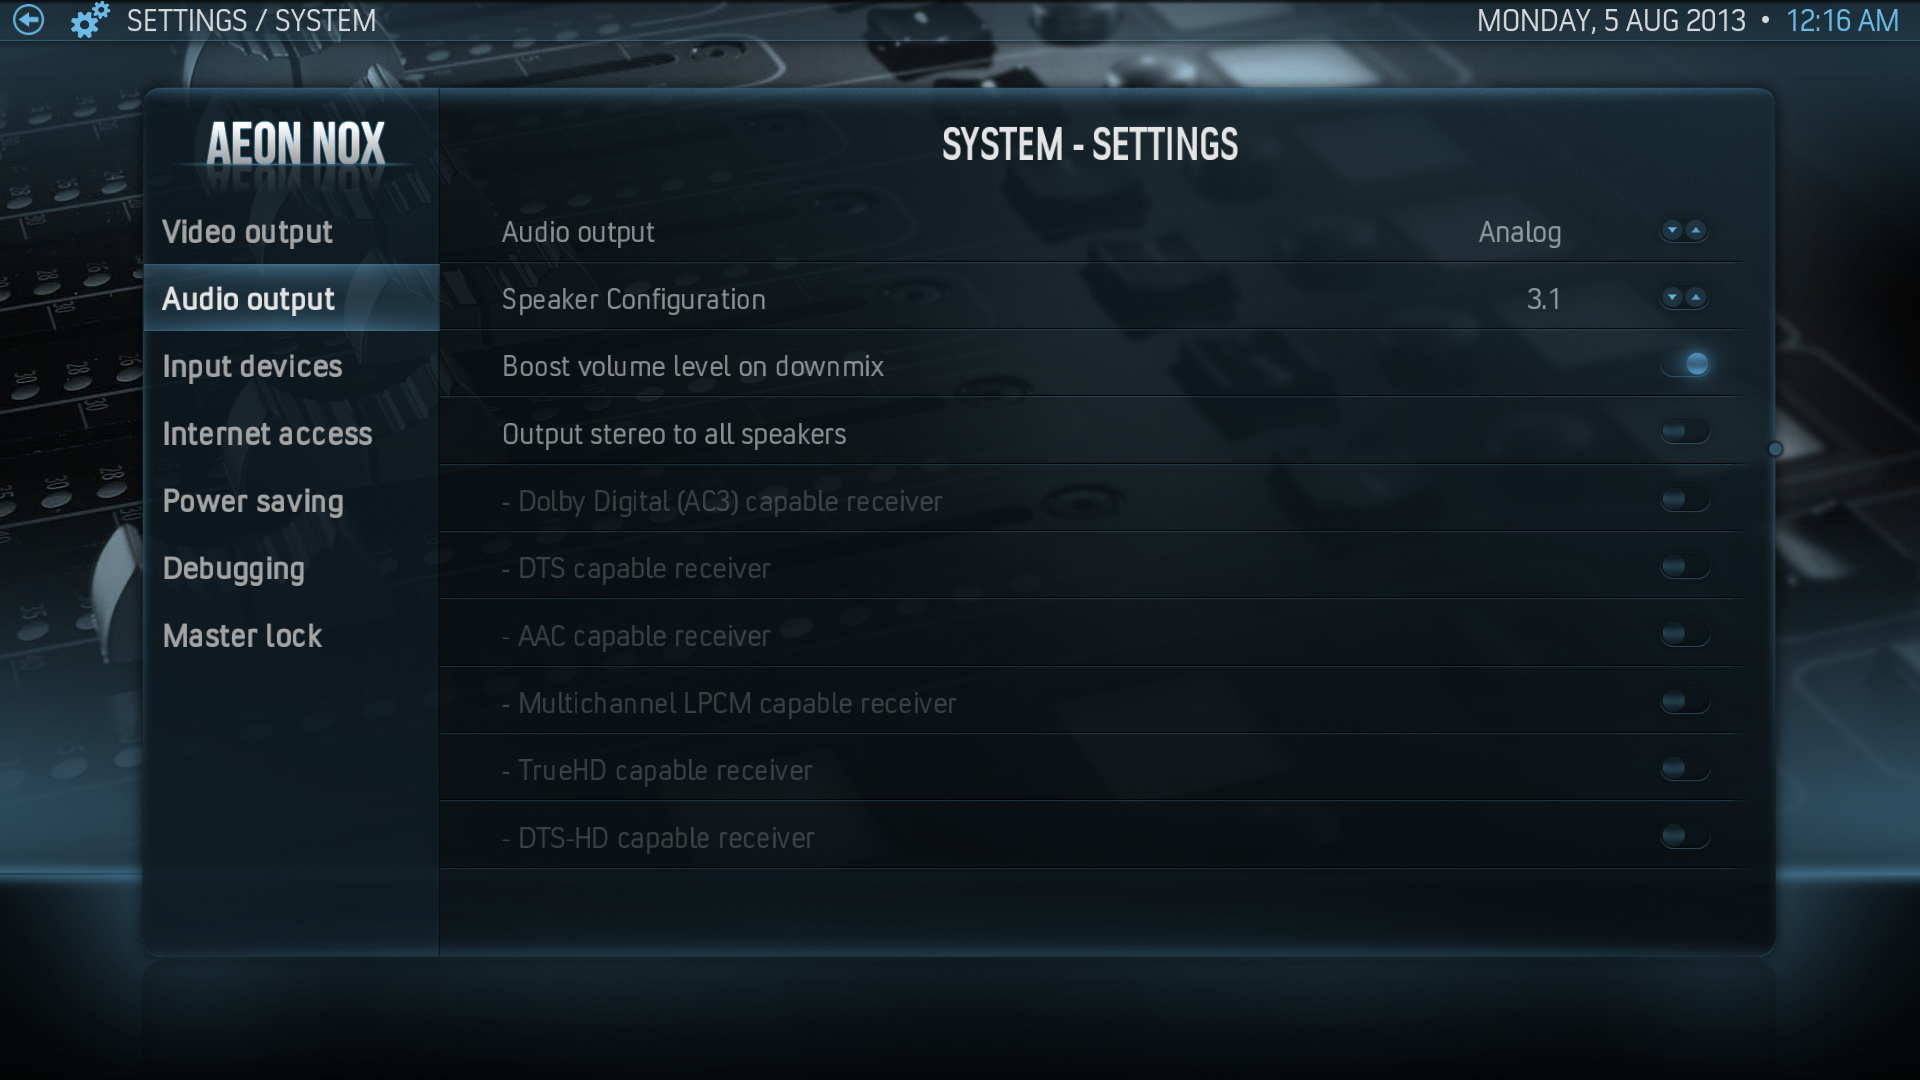 System Settings -> Audio Output